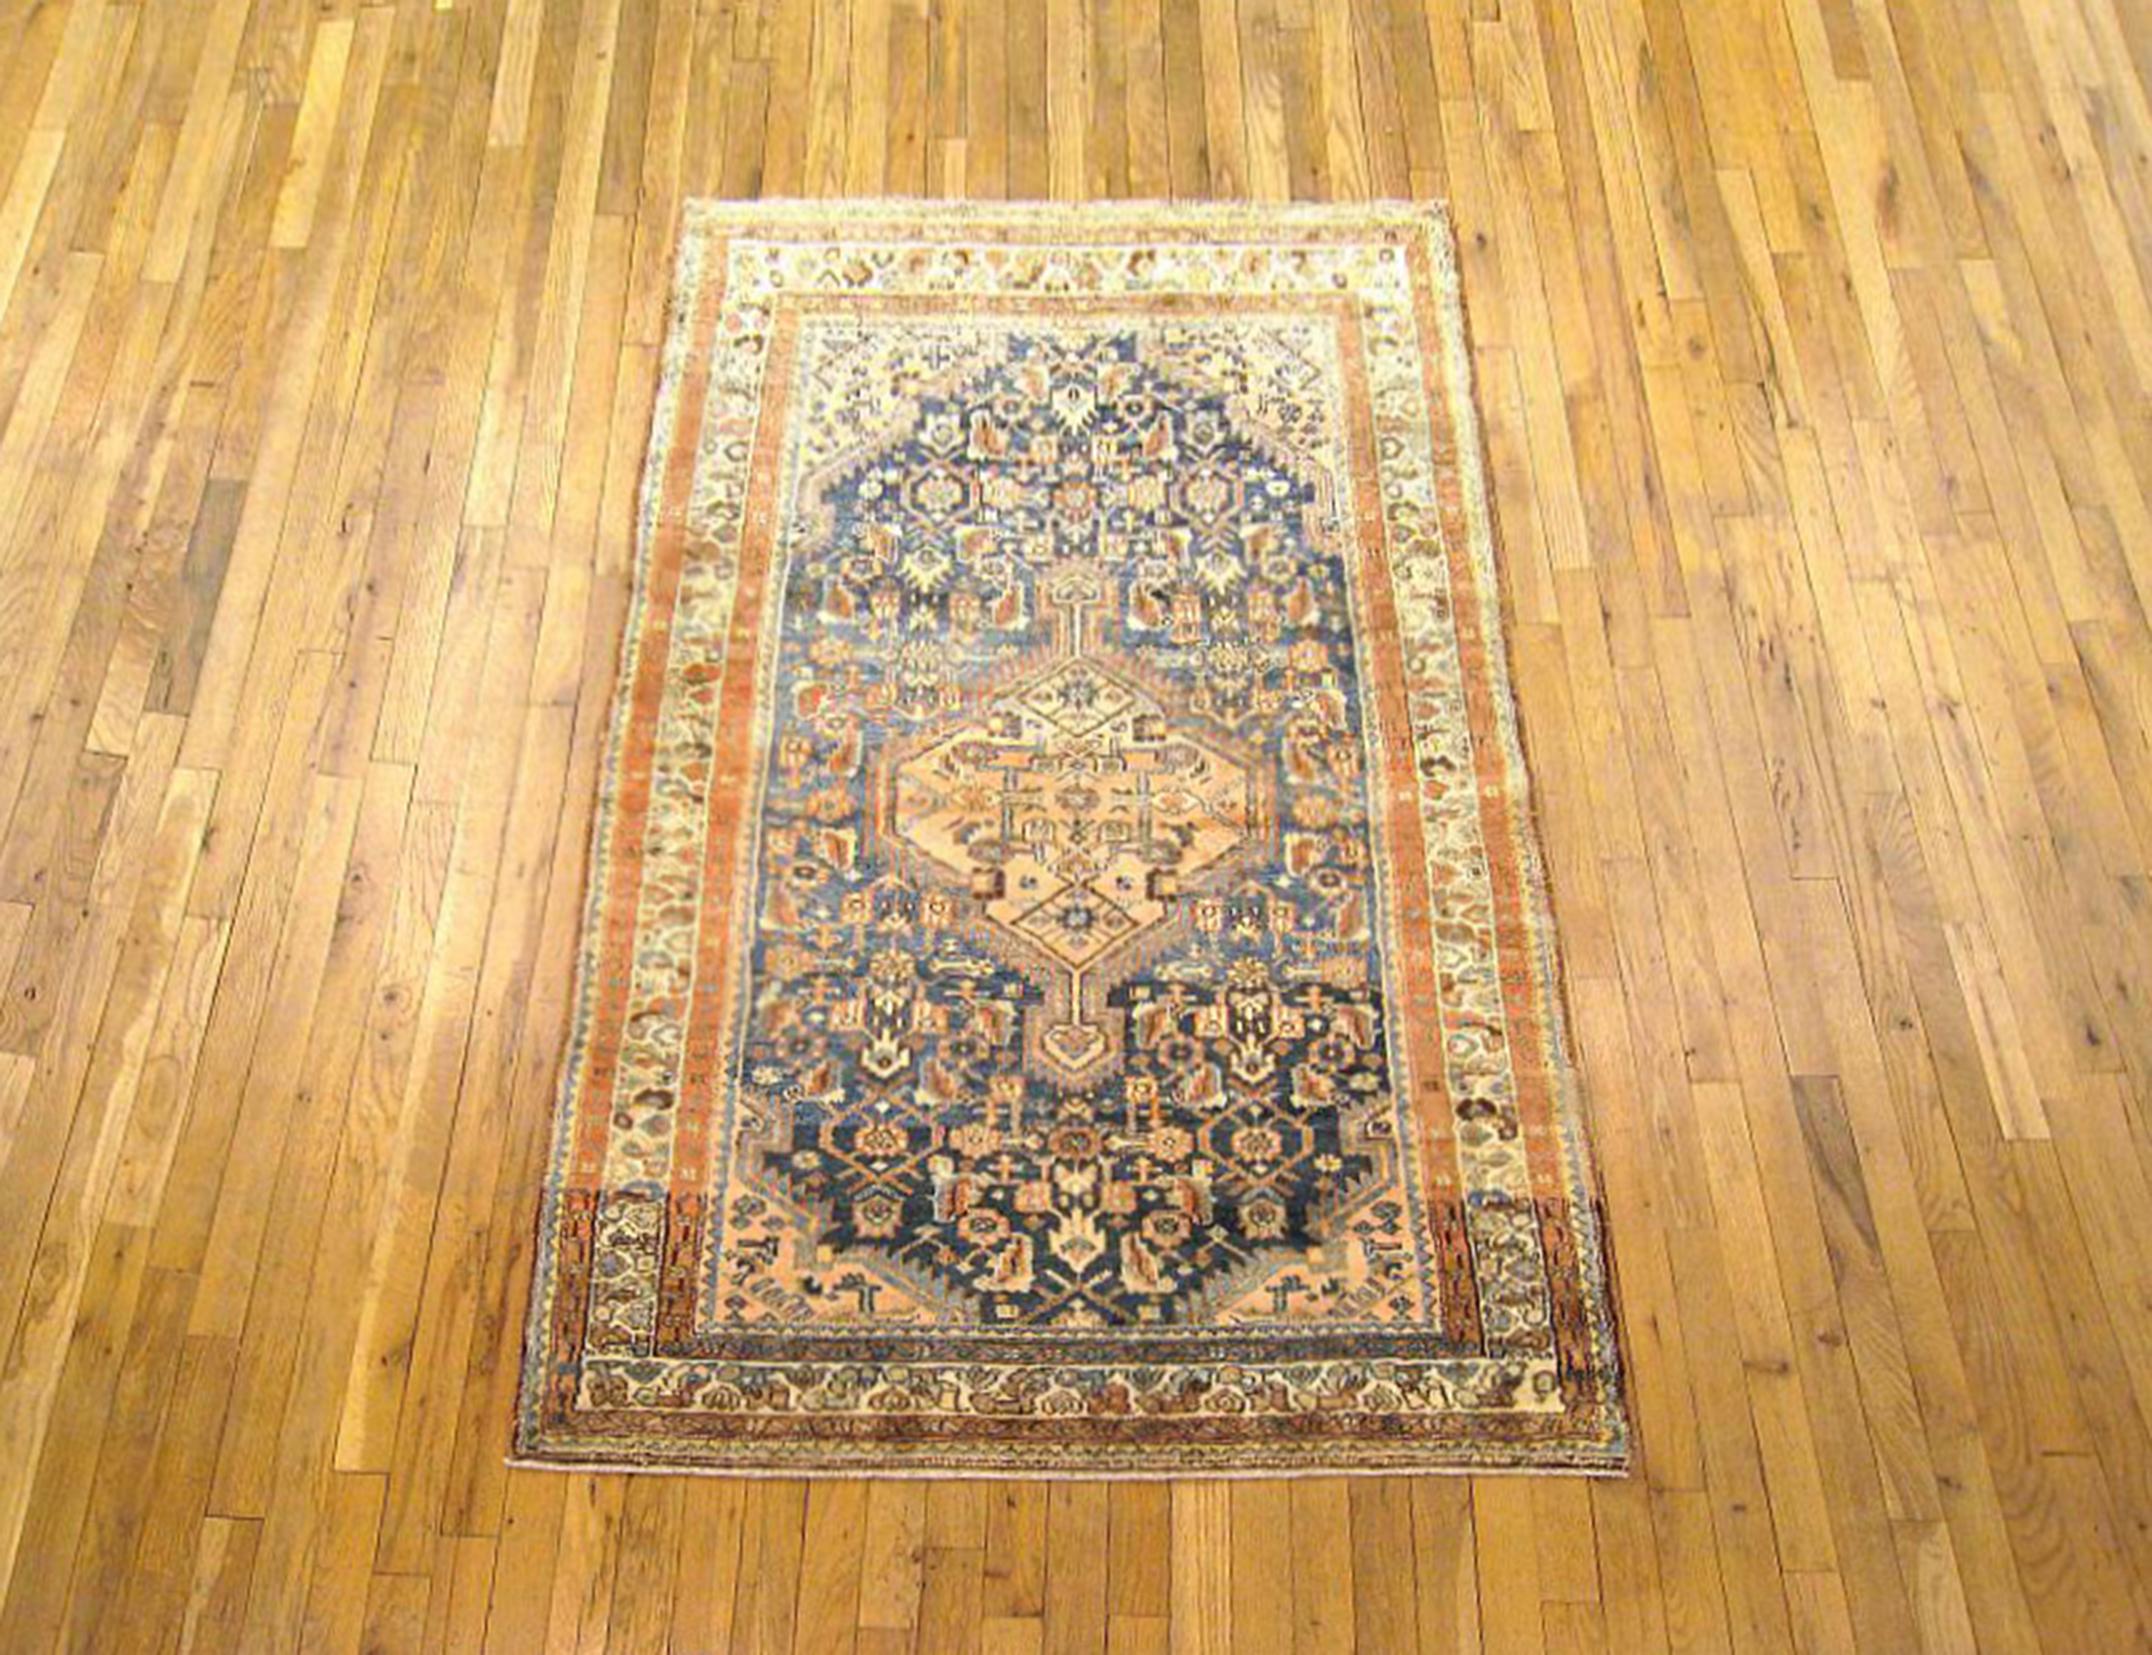 Antique Persian Hamadan Oriental rug, Small size

An antique Persian Hamadan oriental rug in small size, size 5'10”x 3'7”, circa 1920. This lovely hand-knotted carpet features a central medallion in the blue central field. The field is enclosed